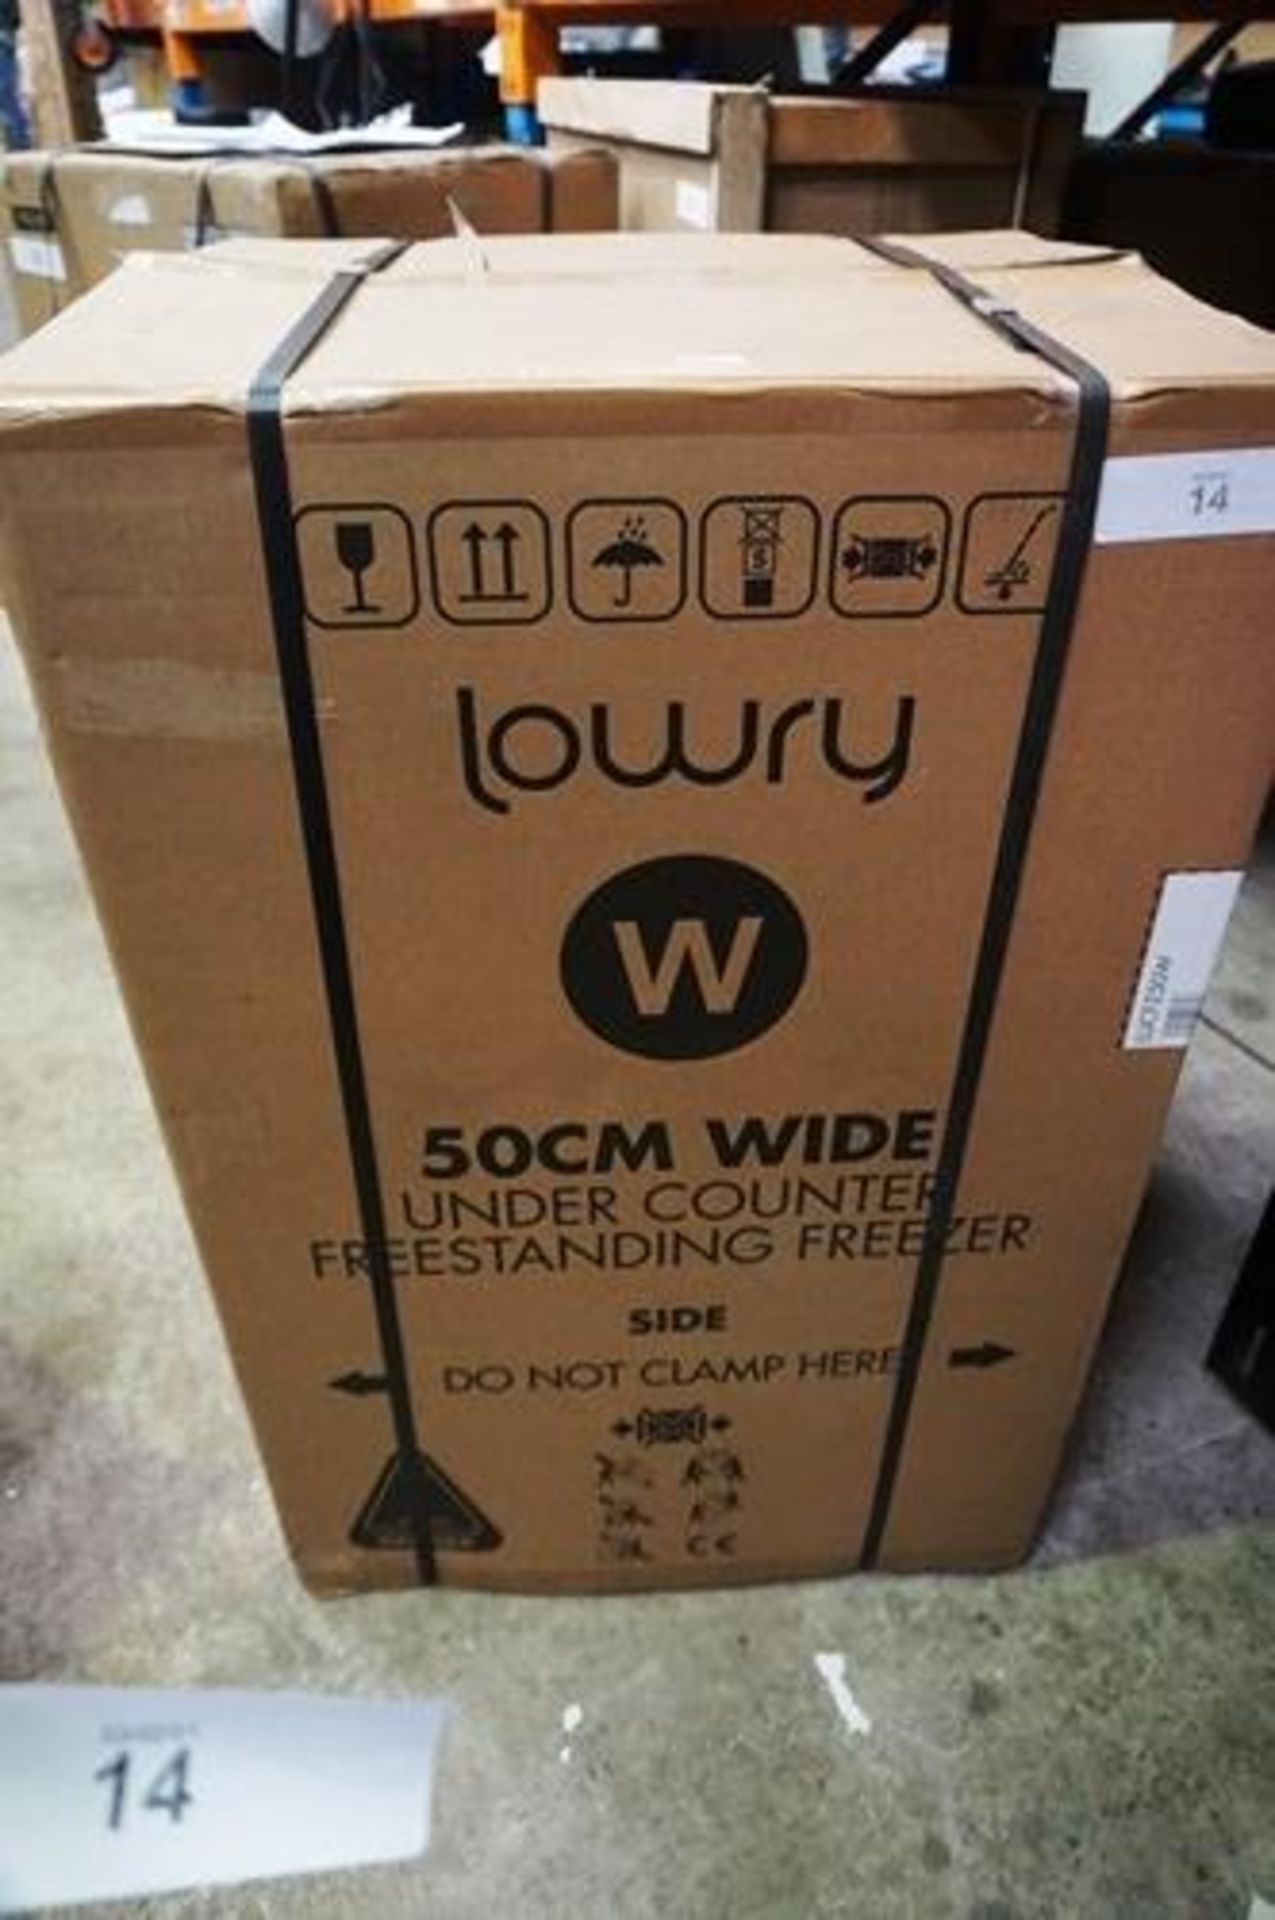 A Lowry 50cm wide under counter freezer, model LUCFZ50W - Sealed new in box (ES7)